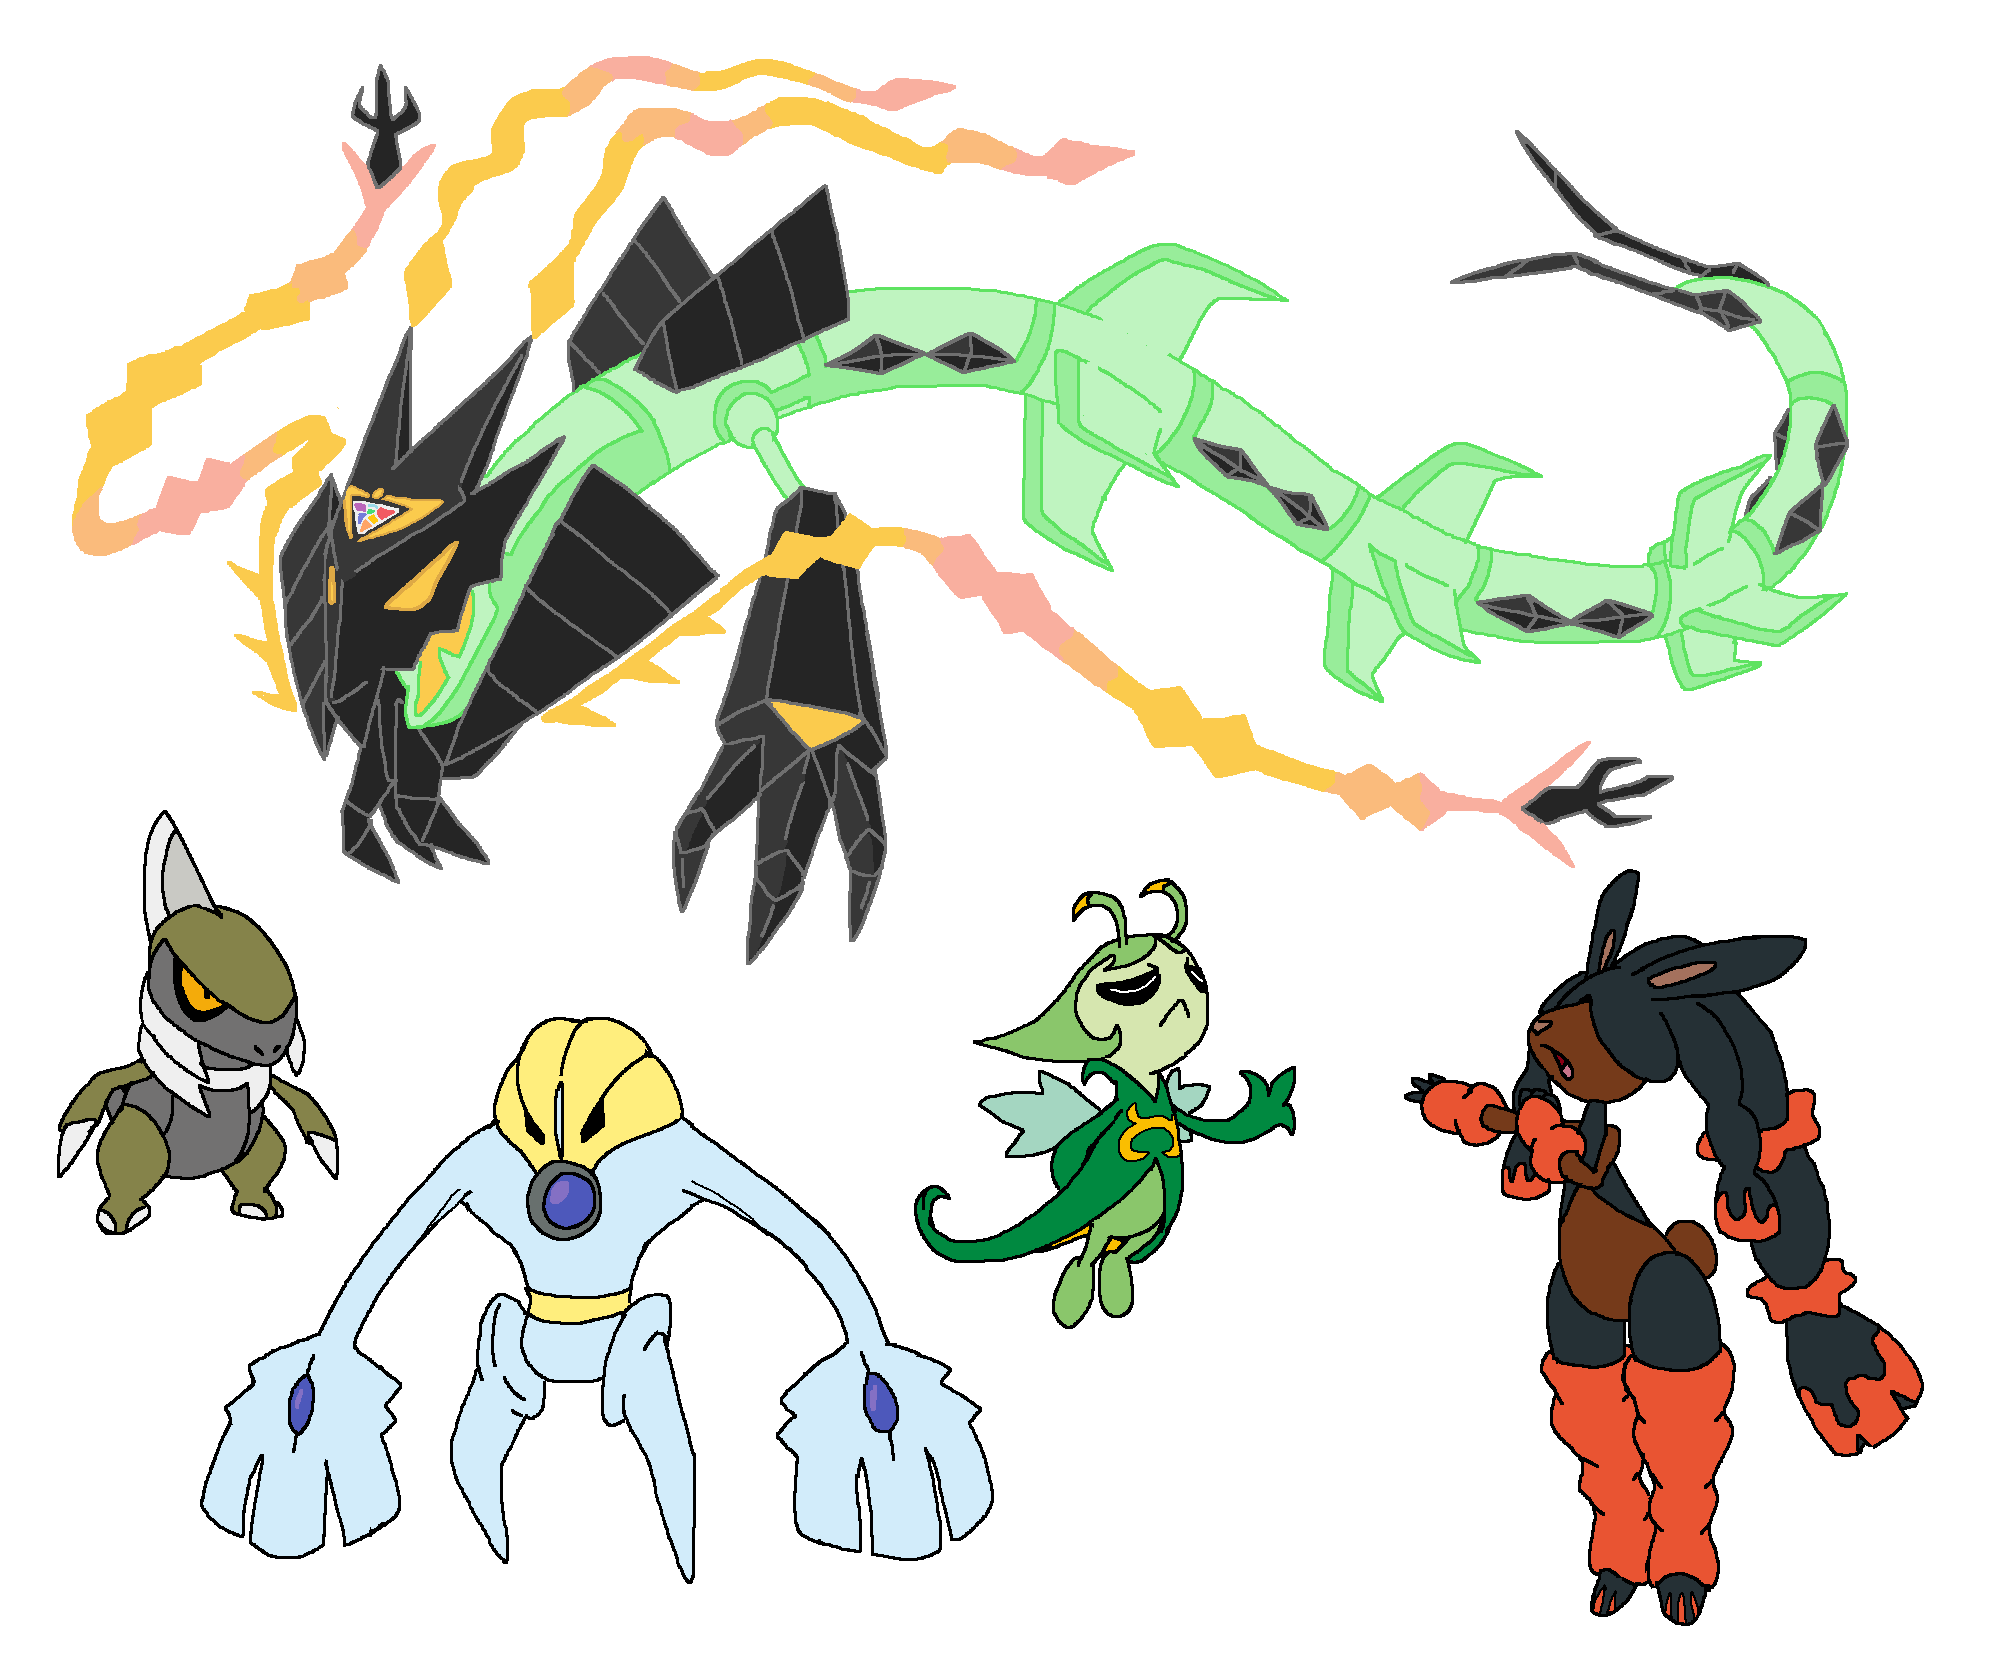 fusions_set_50_by_jwnutz-dbby8no.png